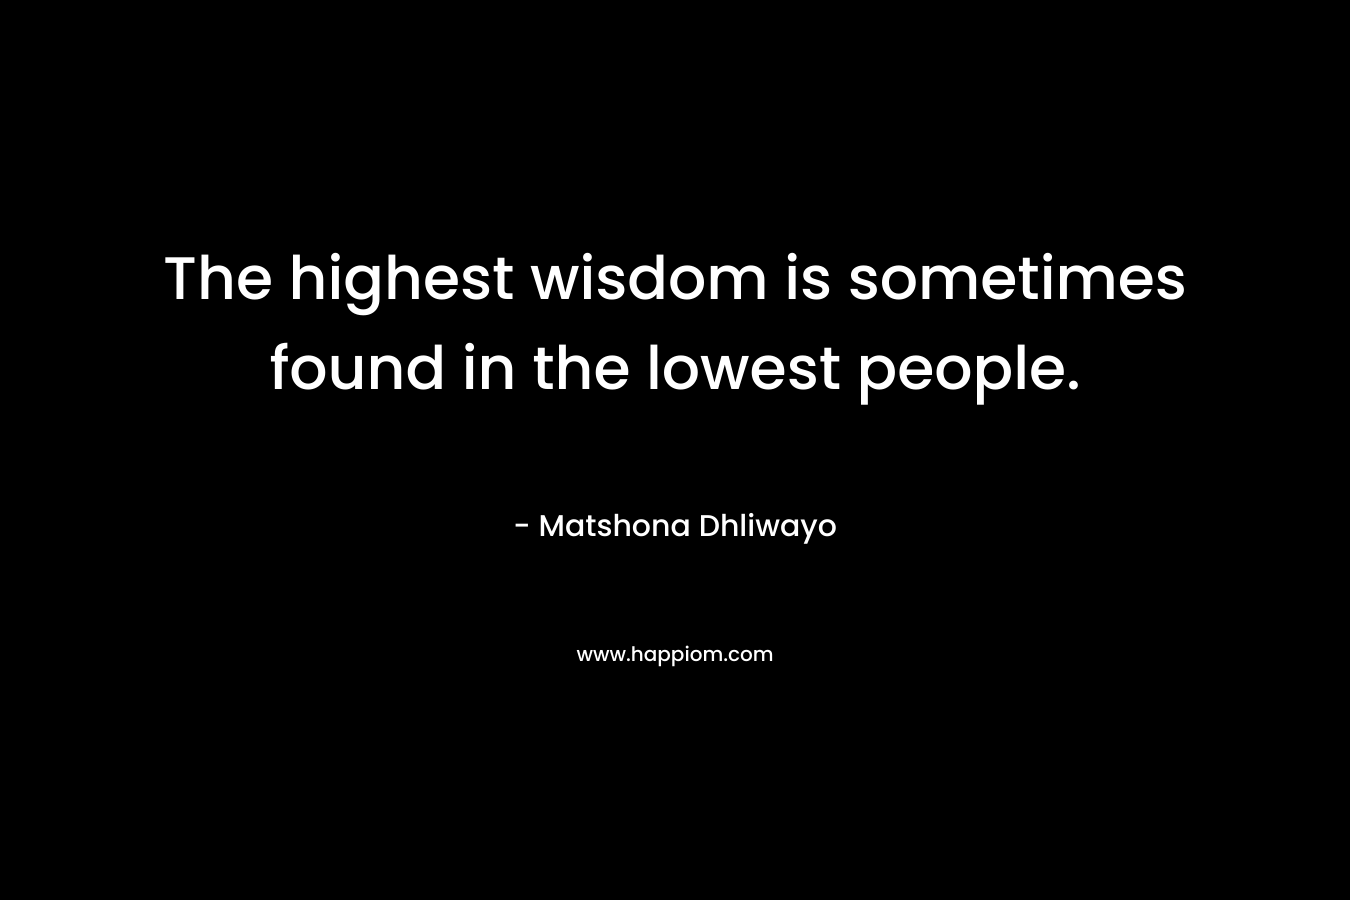 The highest wisdom is sometimes found in the lowest people.